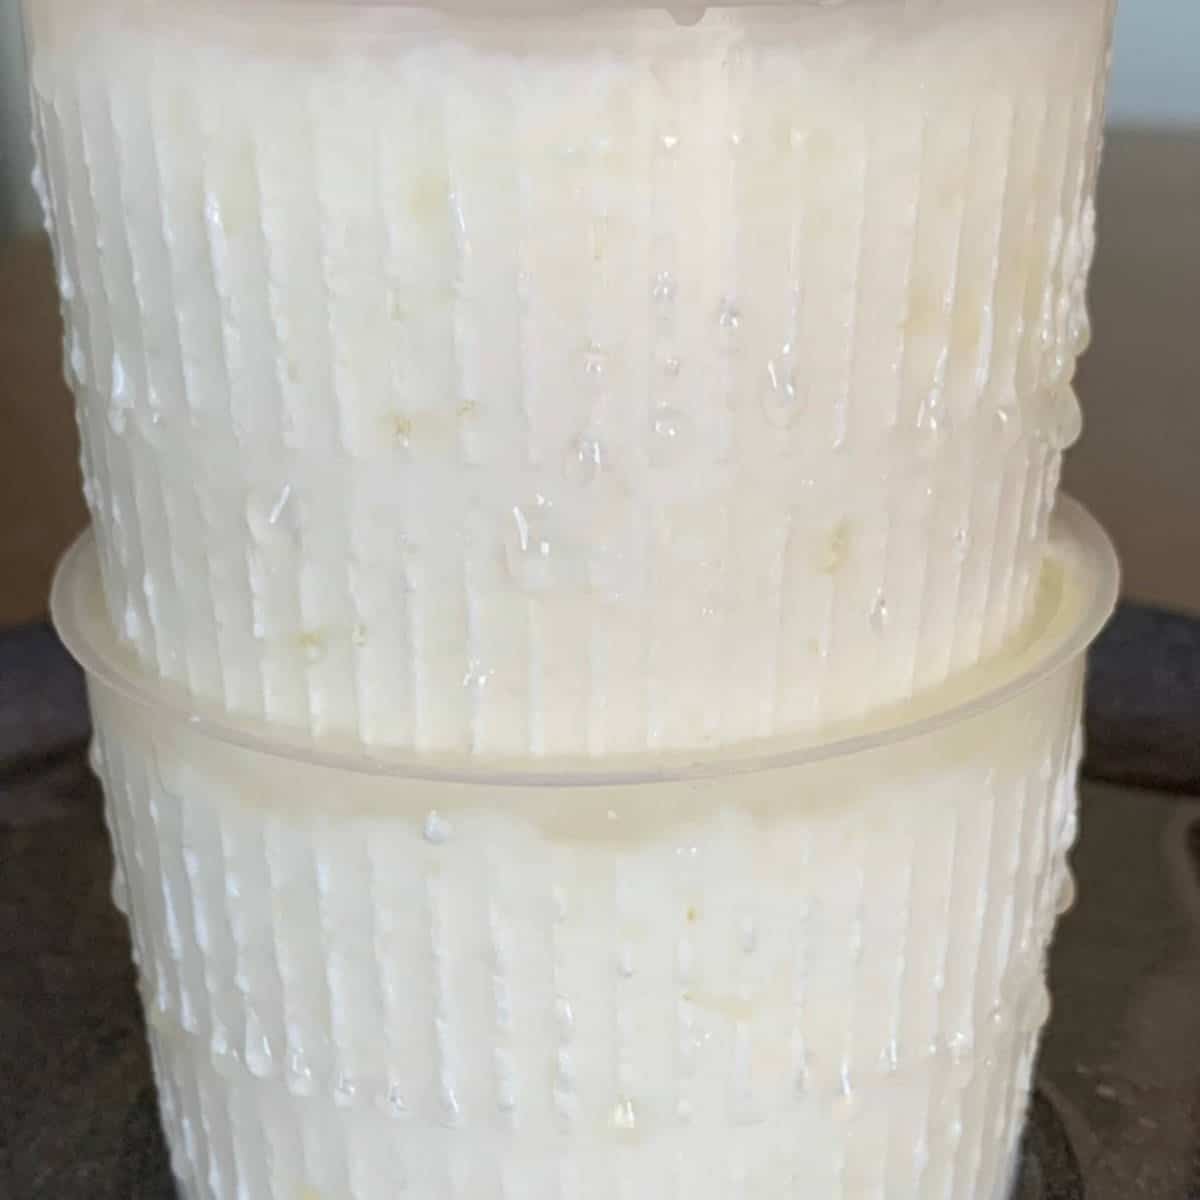 Ricotta is draining in cheese making baskets.